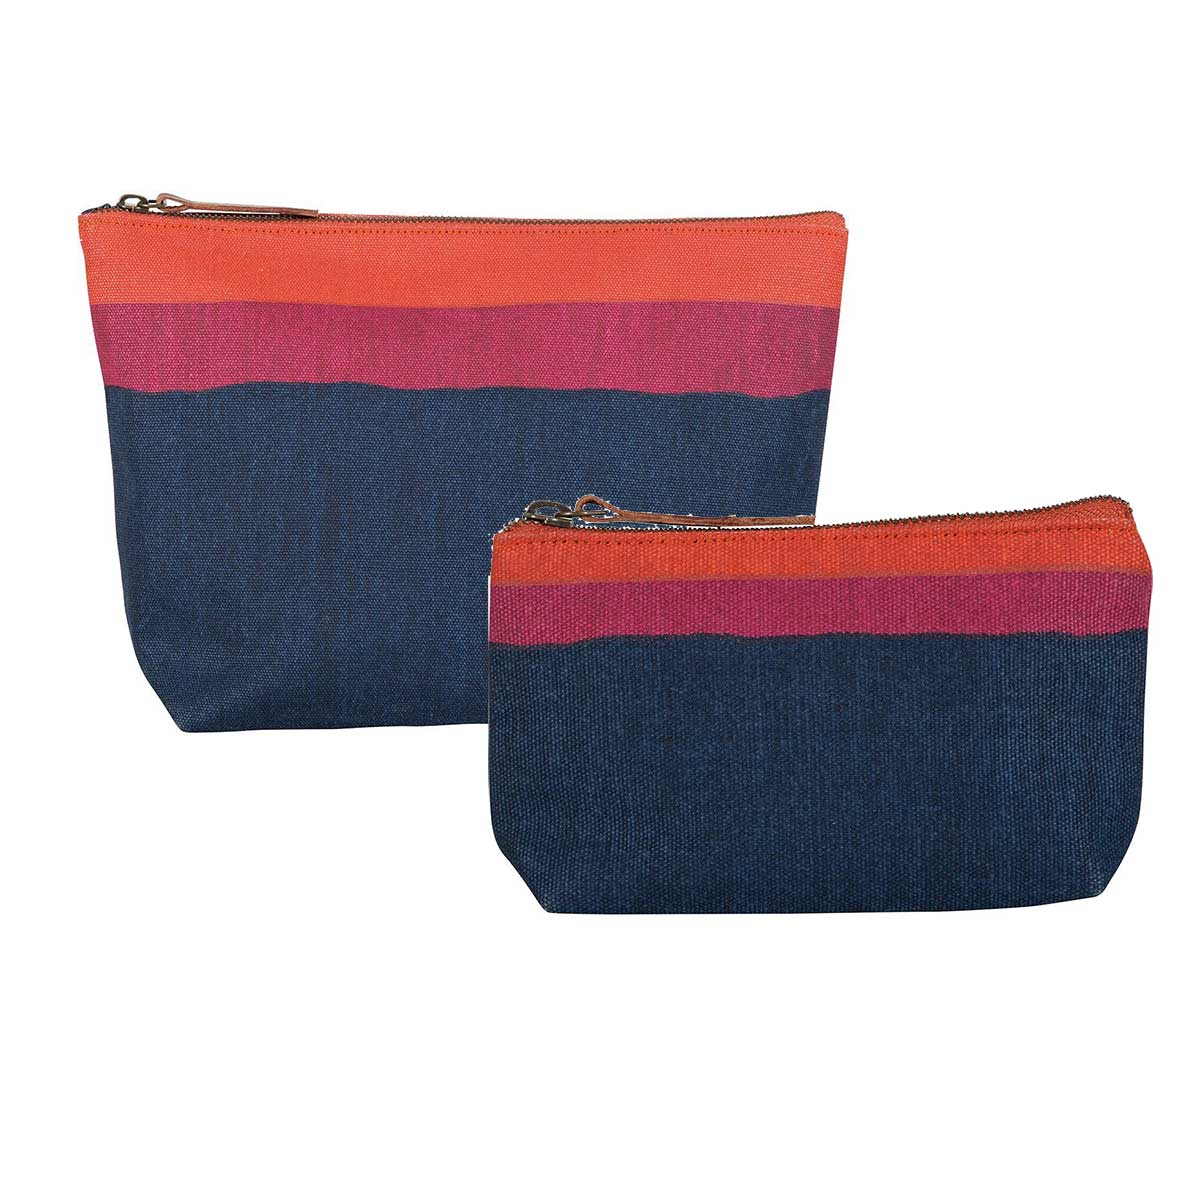 relaxed canvas pouches in red, orange, and navy blue stripe